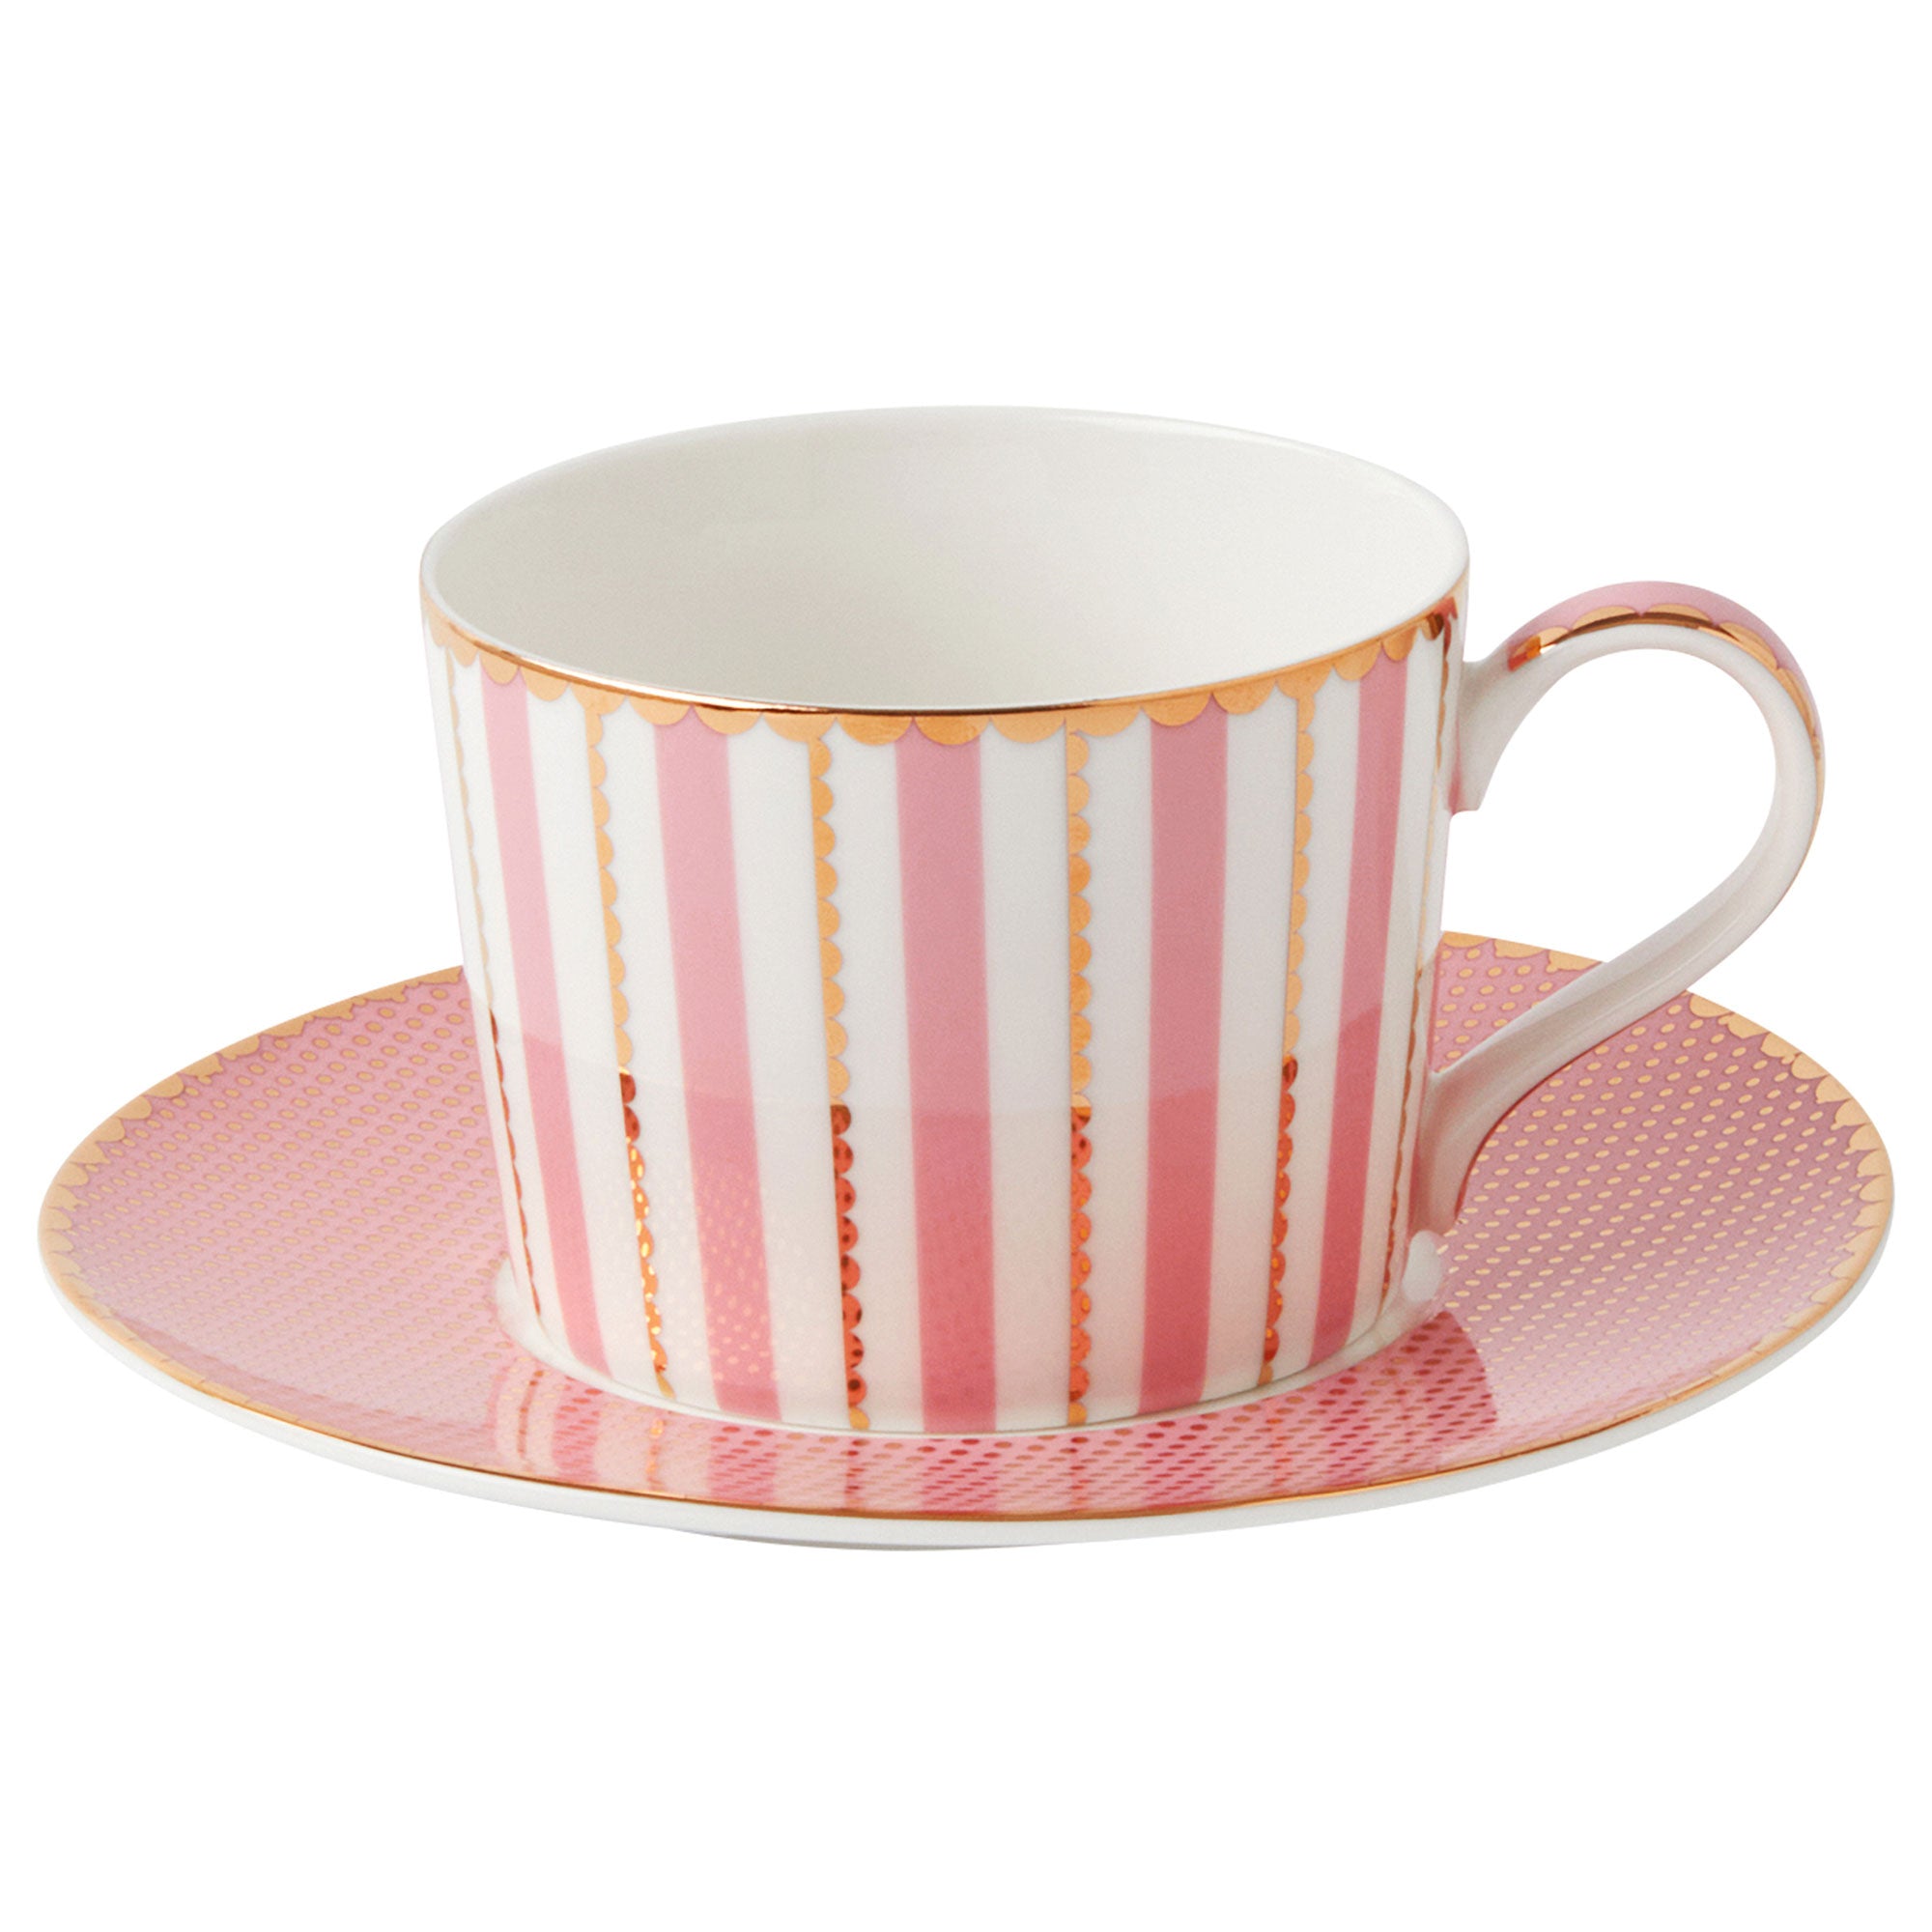 Maxwell & Williams - Teas's & C's Regency Pink Cup & Saucer Pink